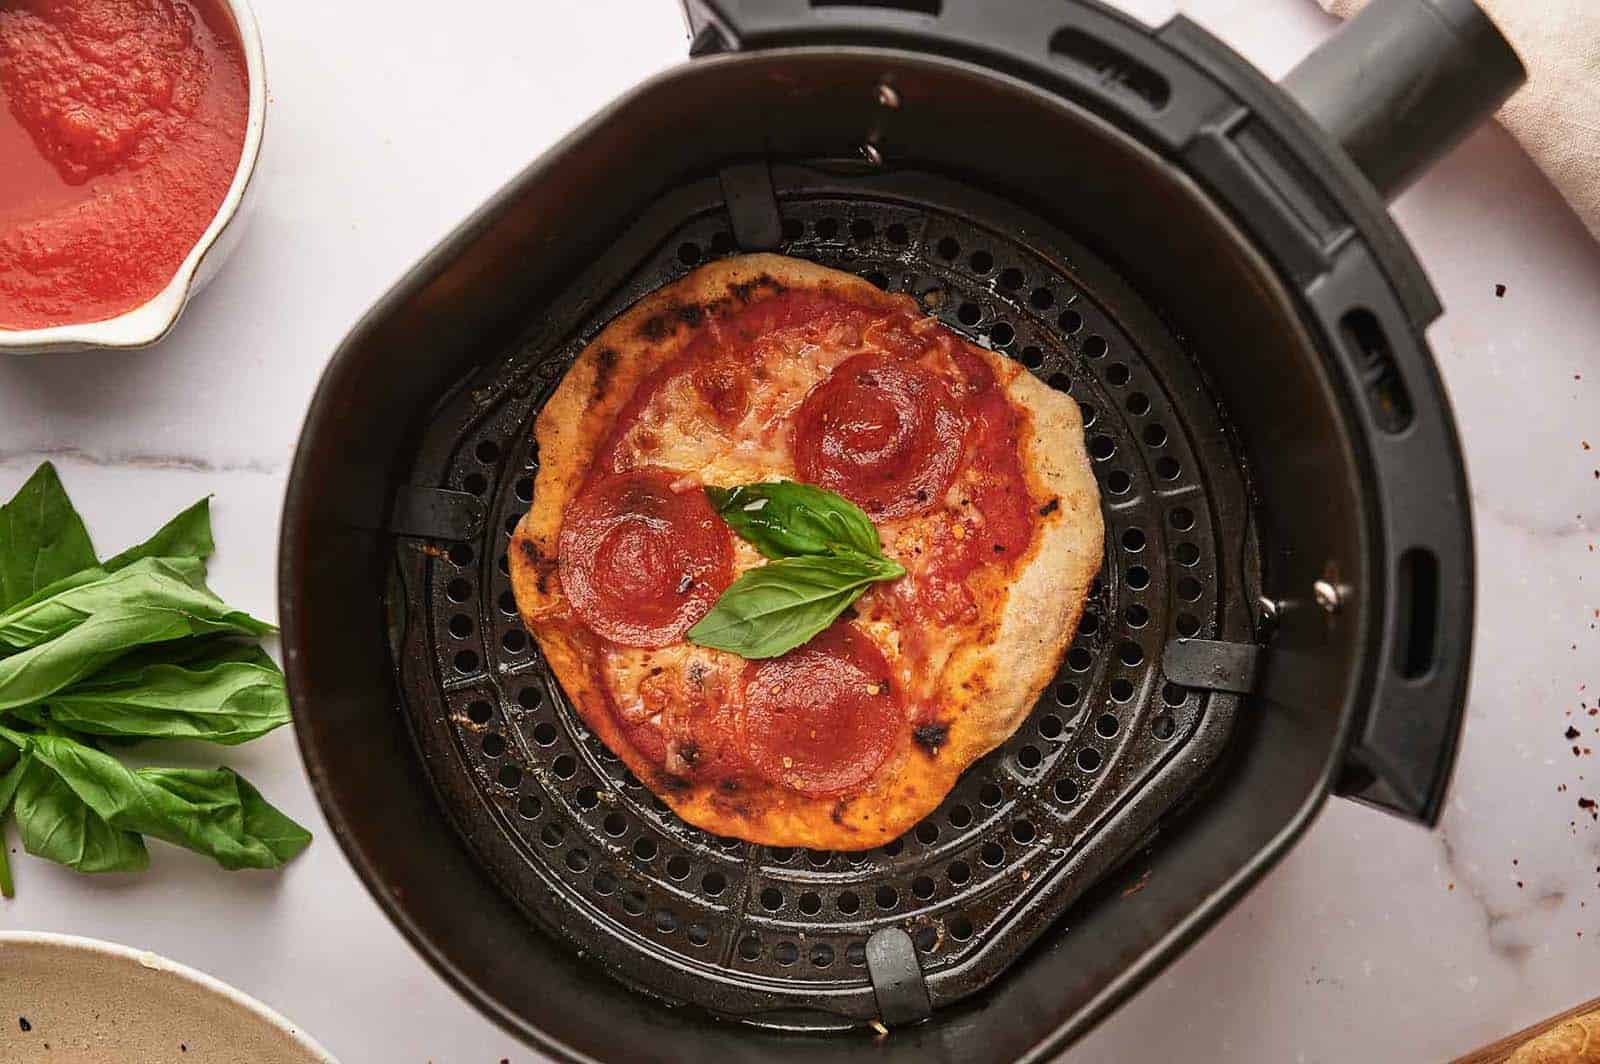 <p>Craving    pizza   for family feasts without the wait? Our Air Fryer Tortilla    Pizza   is the solution. Quick and crispy, it’s a delicious way to satisfy your    pizza   cravings without a long baking time.<br><strong>Get the Recipe: </strong><a href="https://www.splashoftaste.com/air-fryer-tortilla-pizza/?utm_source=msn&utm_medium=page&utm_campaign=msn">Air Fryer Tortilla Pizza</a></p>